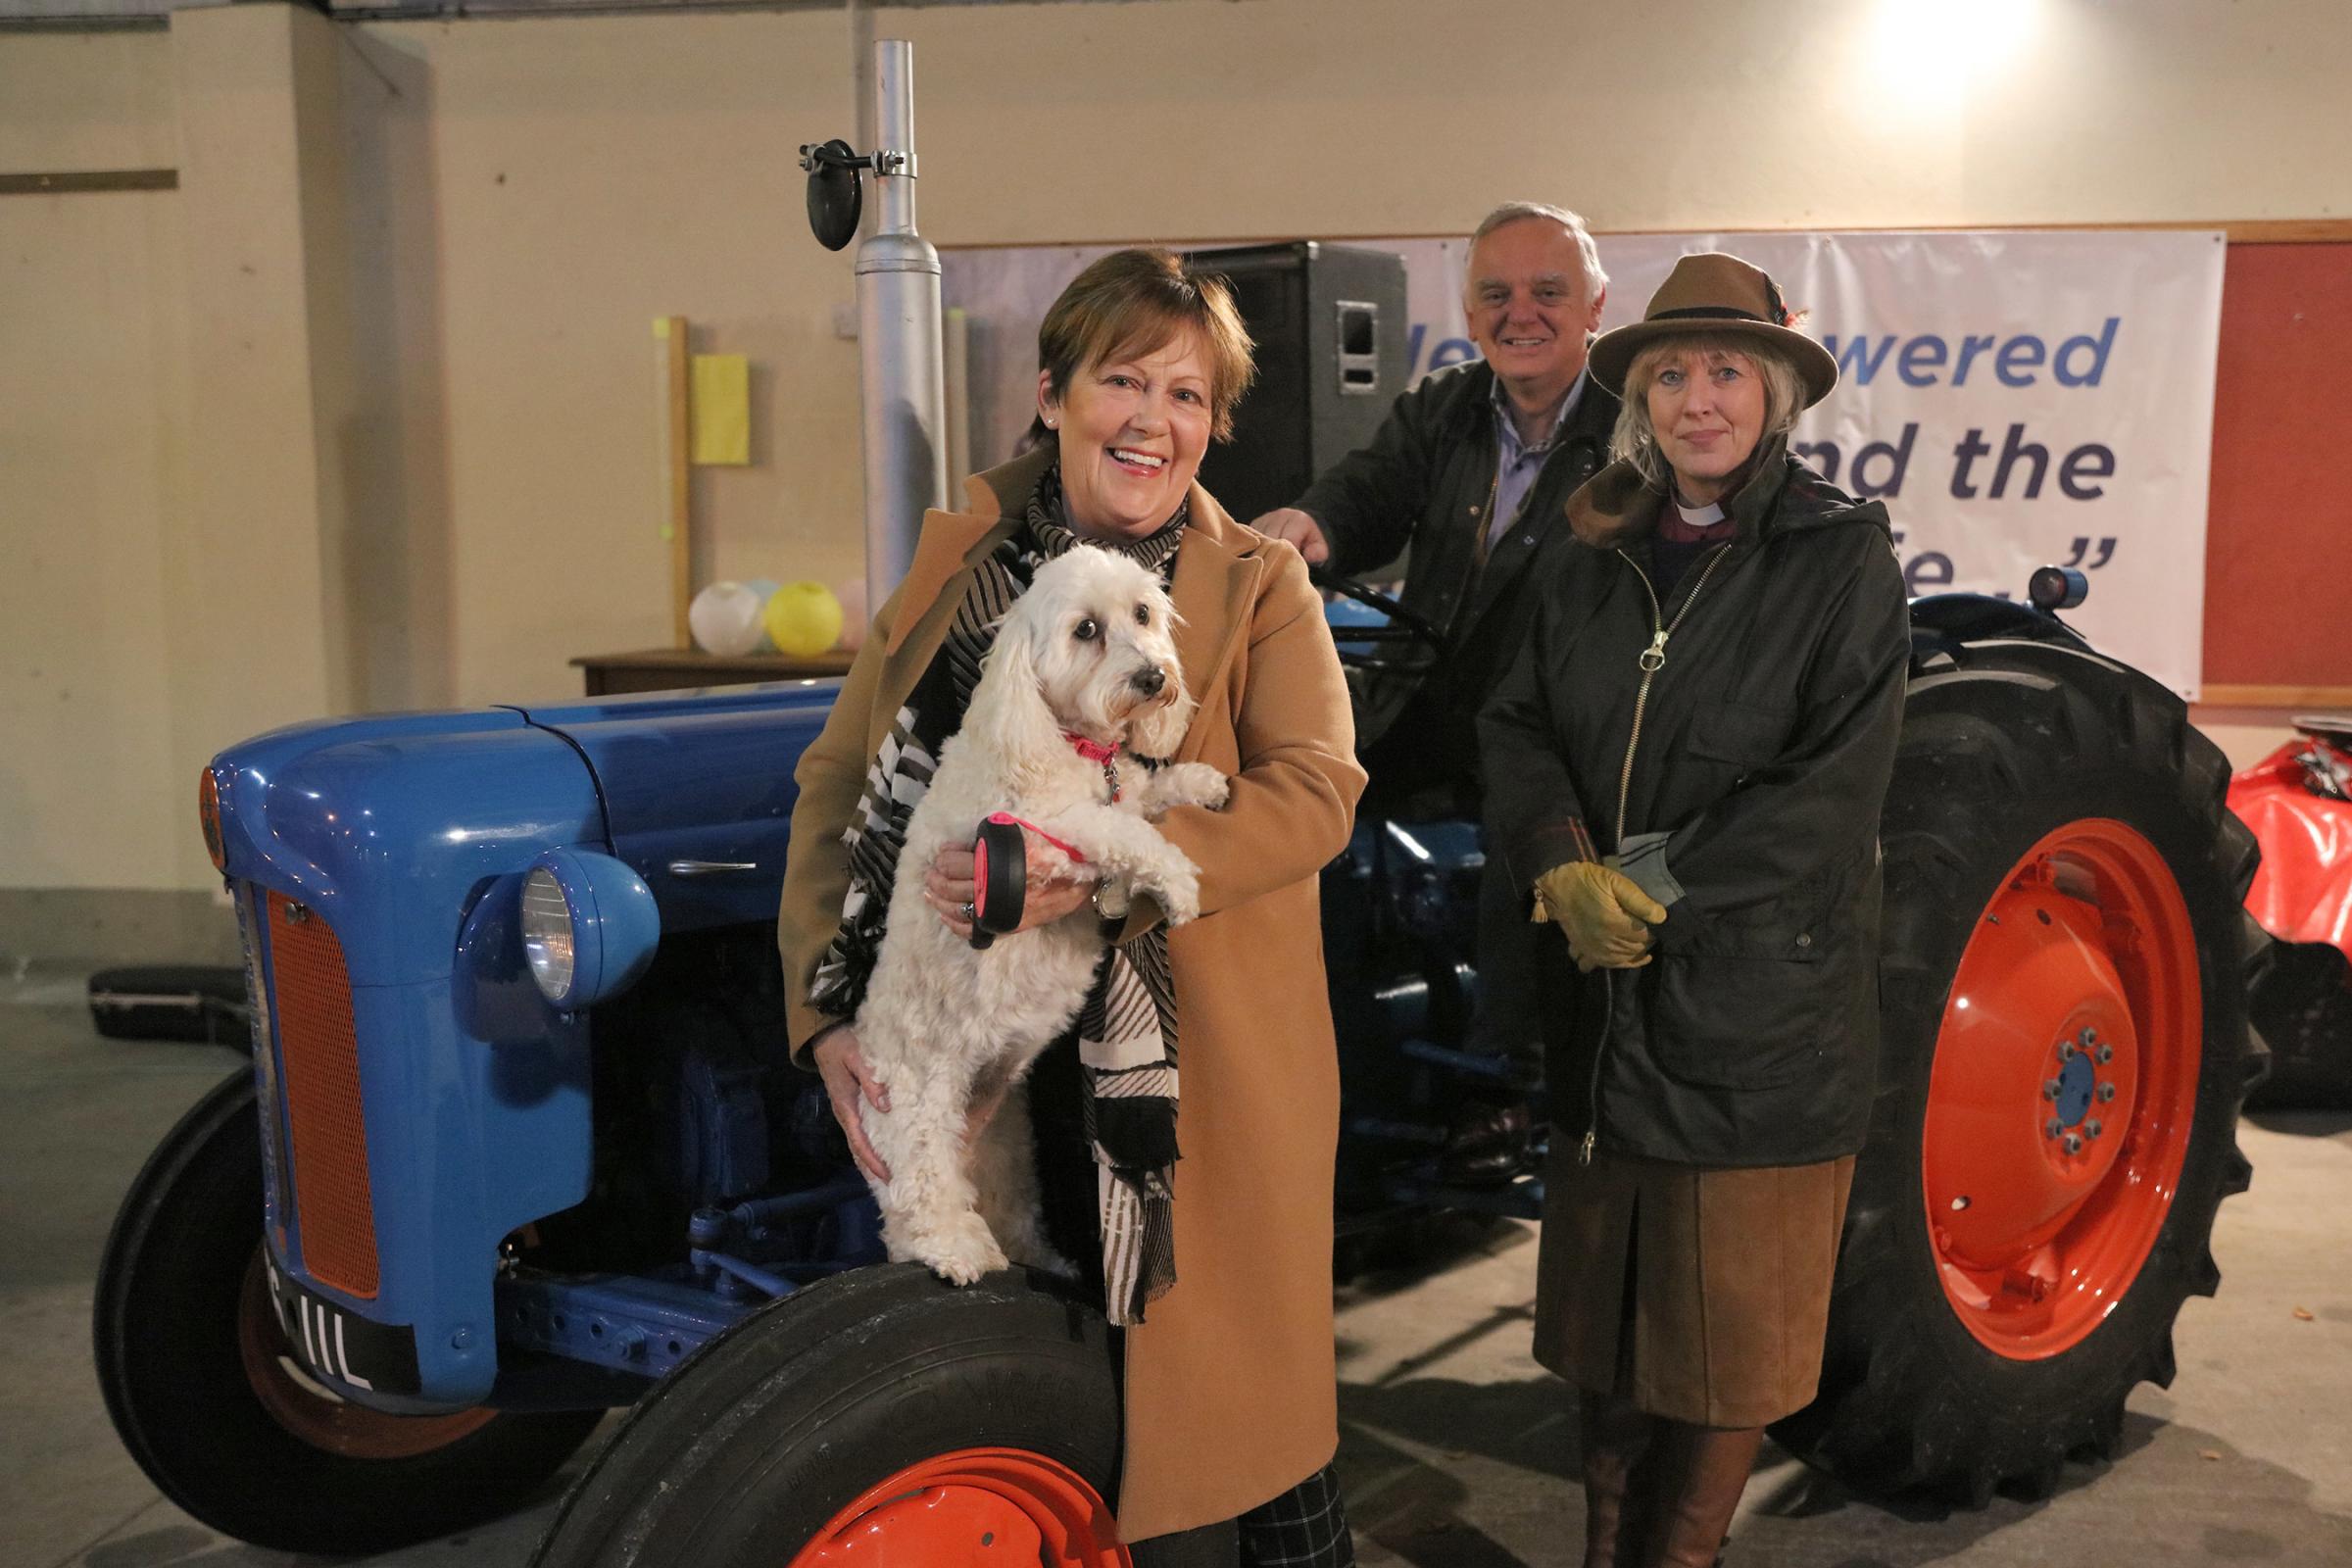 Heather Carson and her dog, Tilly, join Roy and Rev. Lorna Dreaning for the Harvest Service at Enniskillen Farmers Mart.